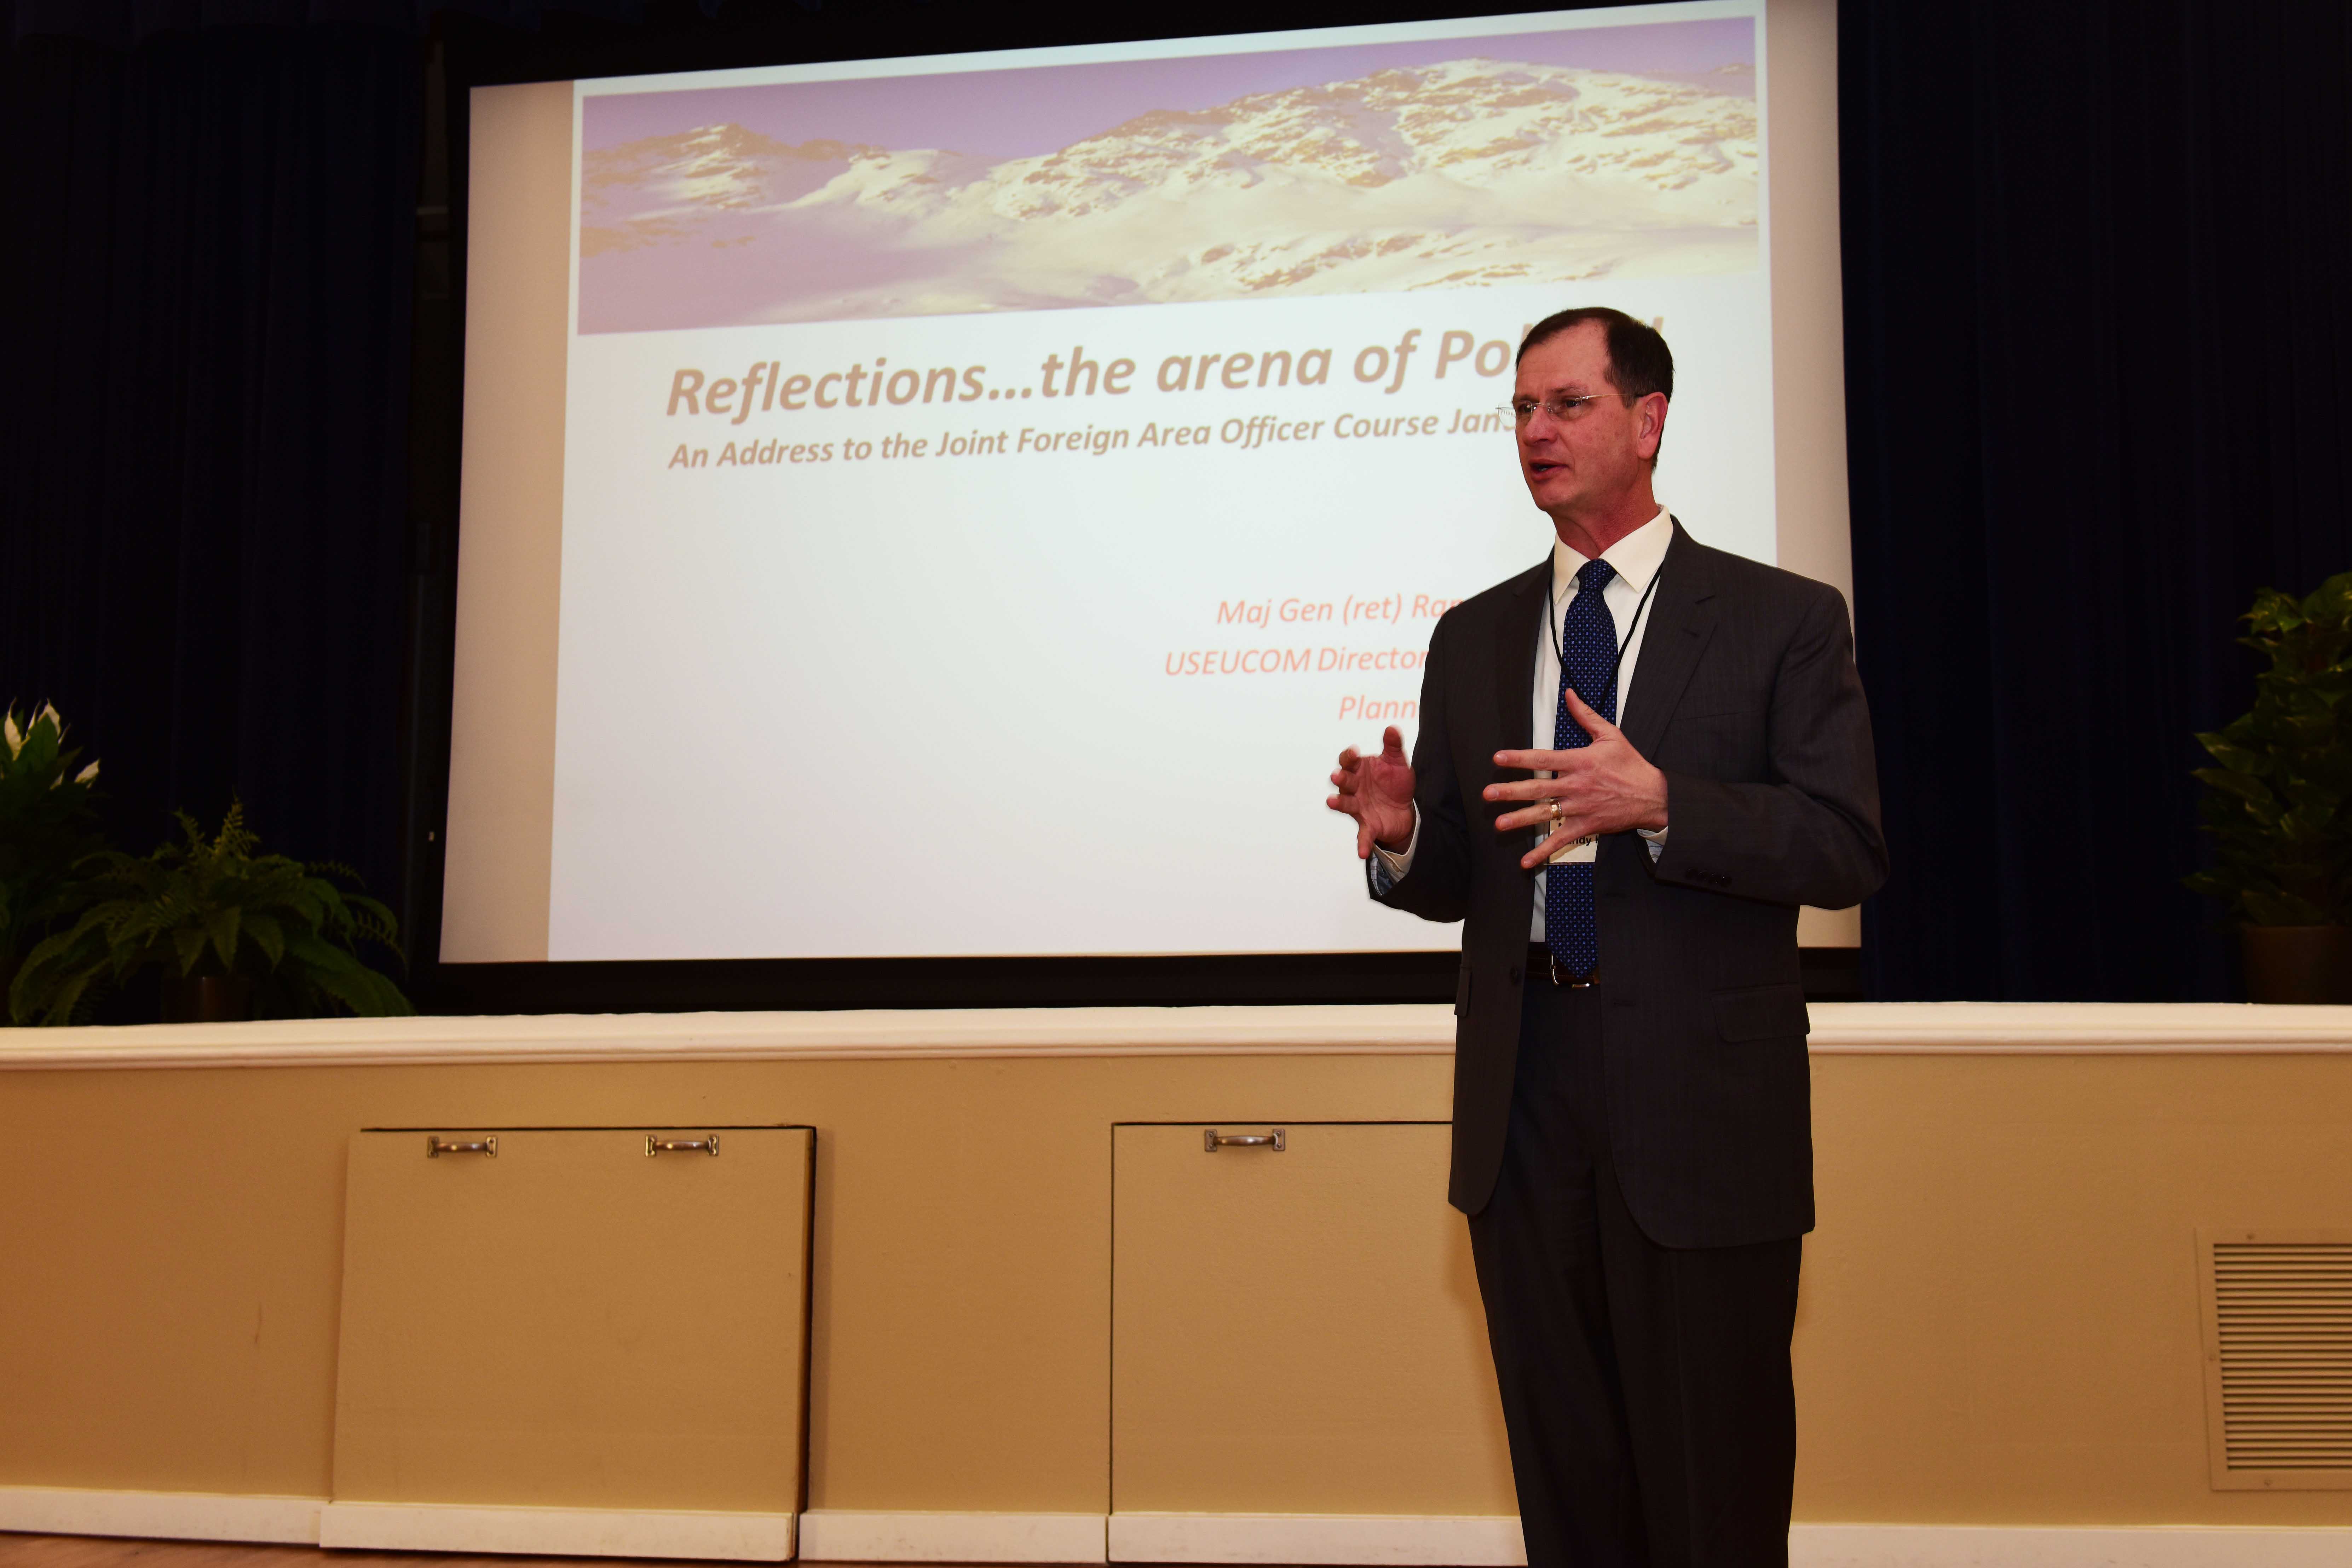 Retired general opens joint foreign area officer course with reflection